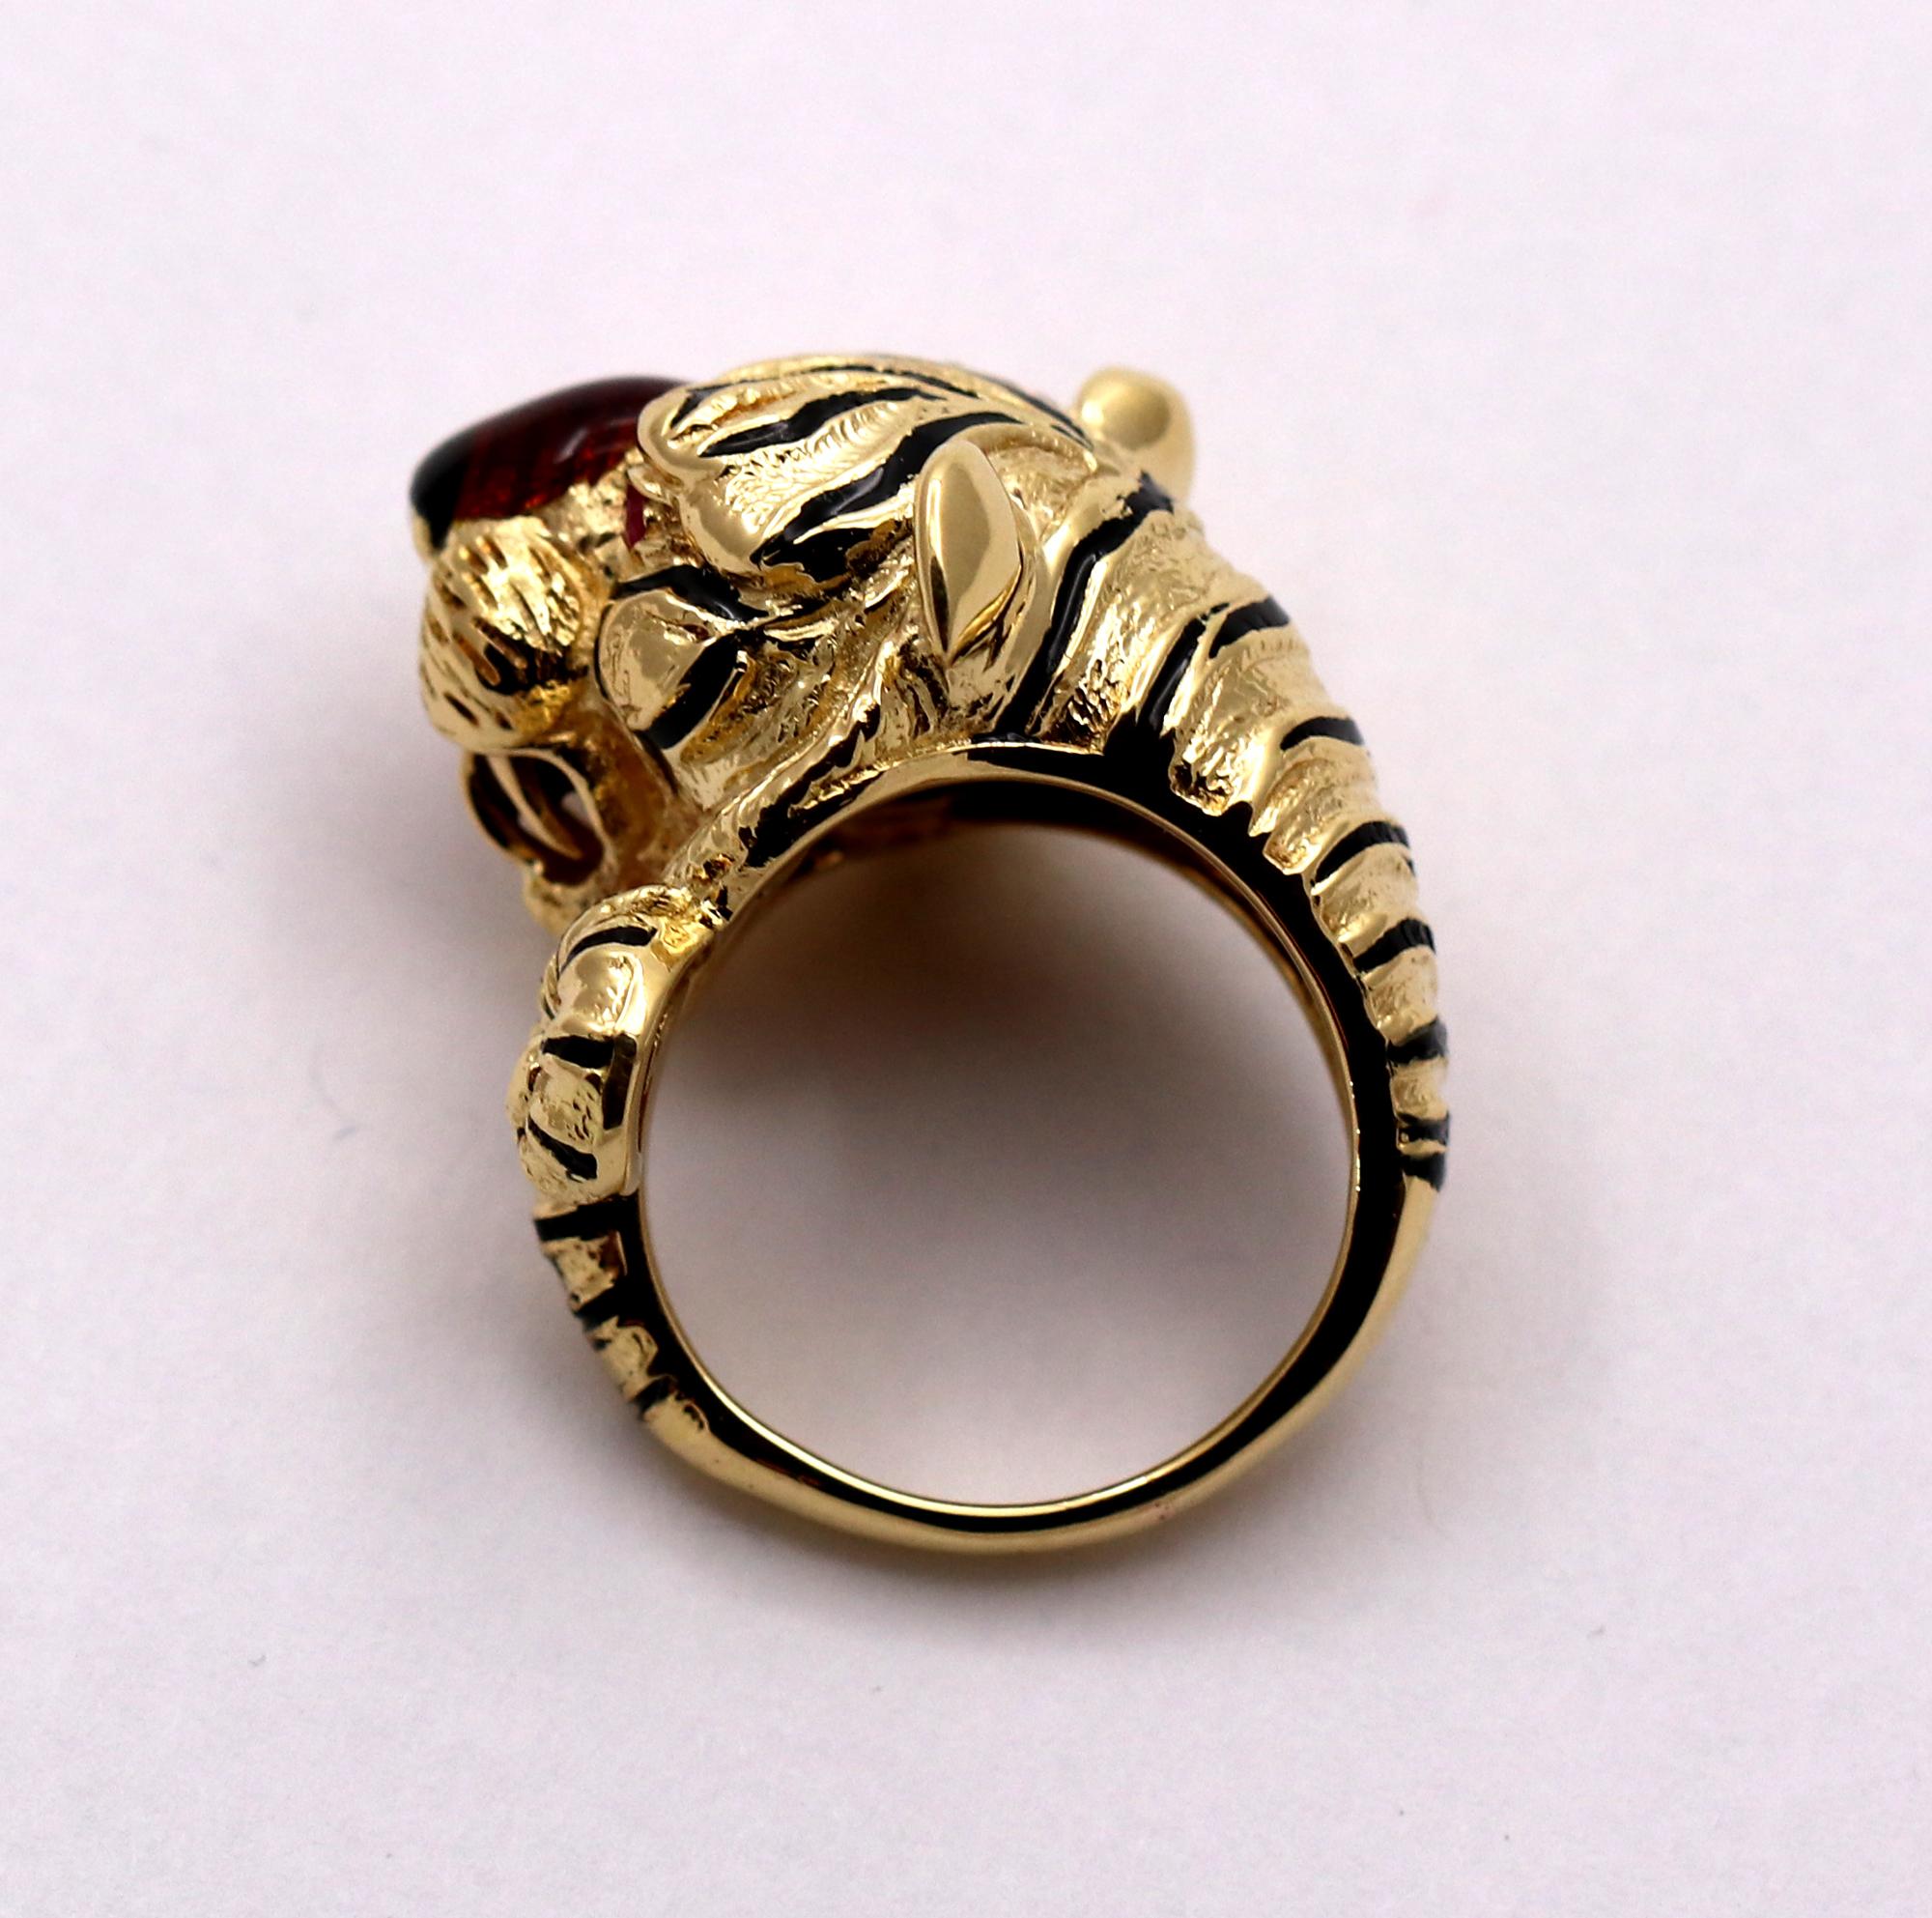 Frascarolo Gold and Enamel Tiger Ring with Ruby Eyes 1